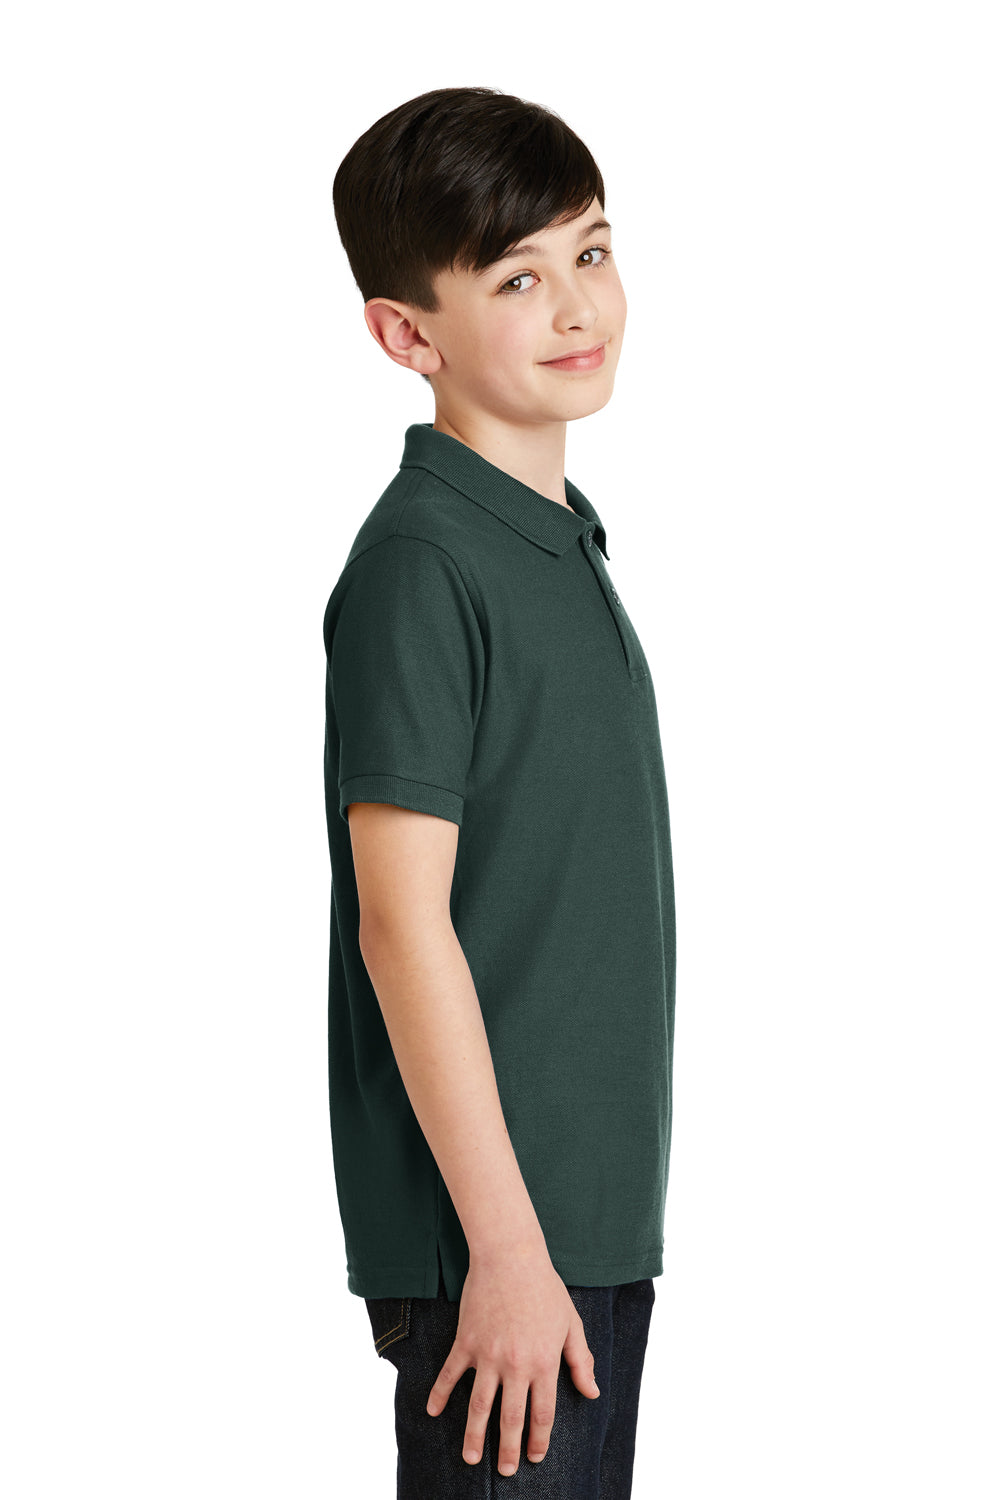 Port Authority Y500 Youth Silk Touch Wrinkle Resistant Short Sleeve Polo Shirt Dark Green Side